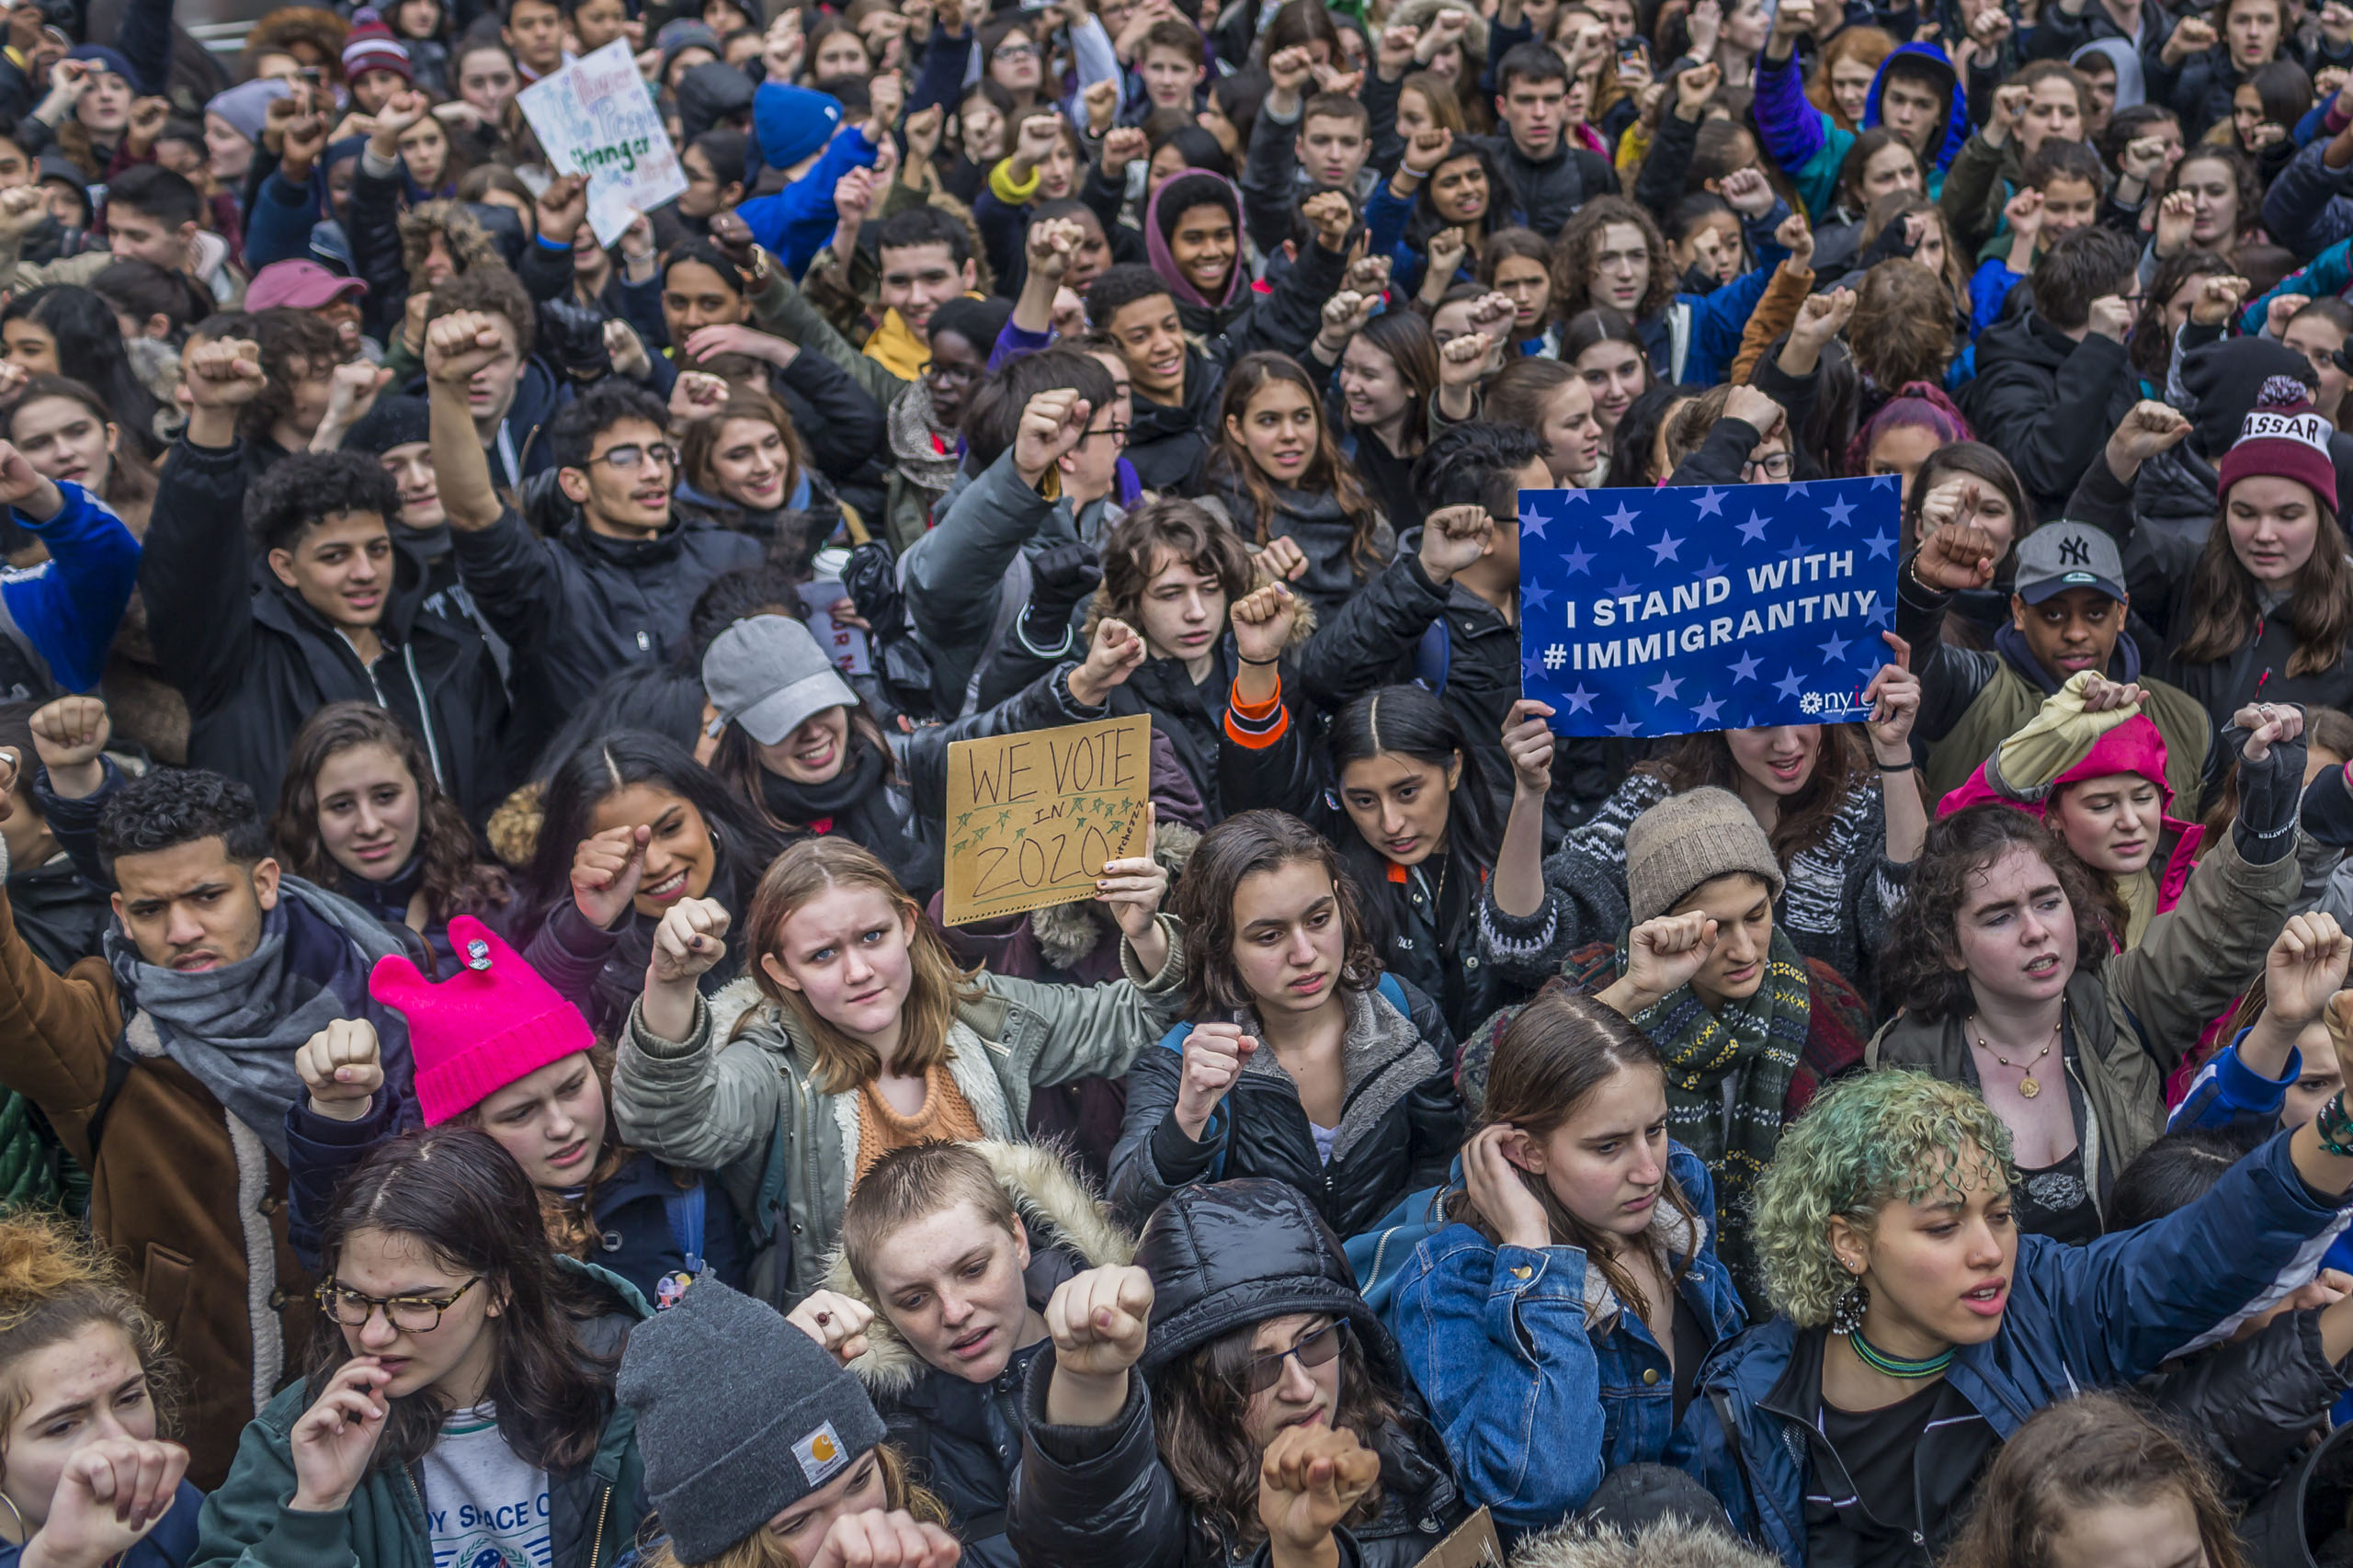 Hundreds of public school students from all over New York City, staged a noon-walkout and rallied against the presidency and policies of Donald Trump, on Feb. 7, 2017.